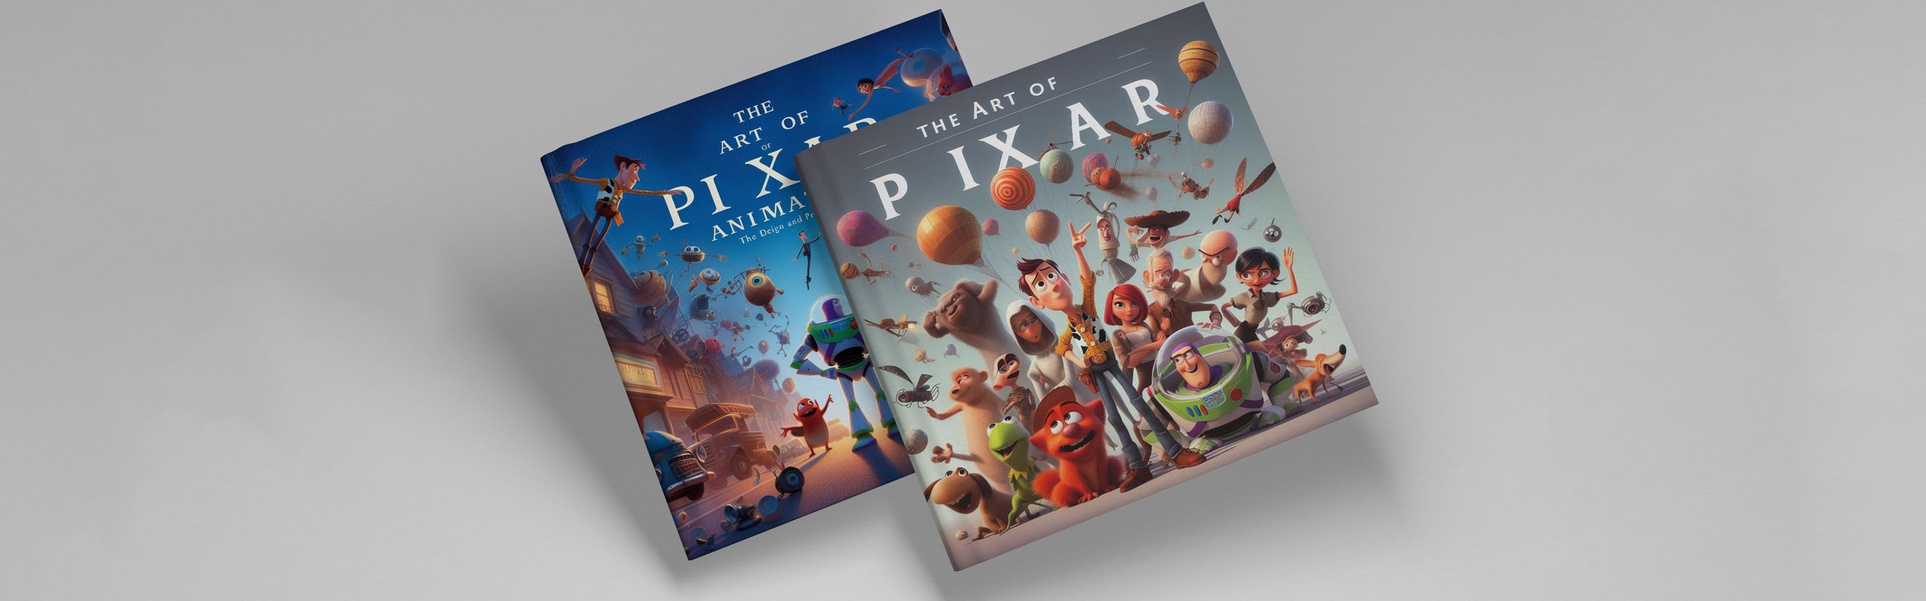 The Art of Pixar: The Select Art from 25 Years of Animation